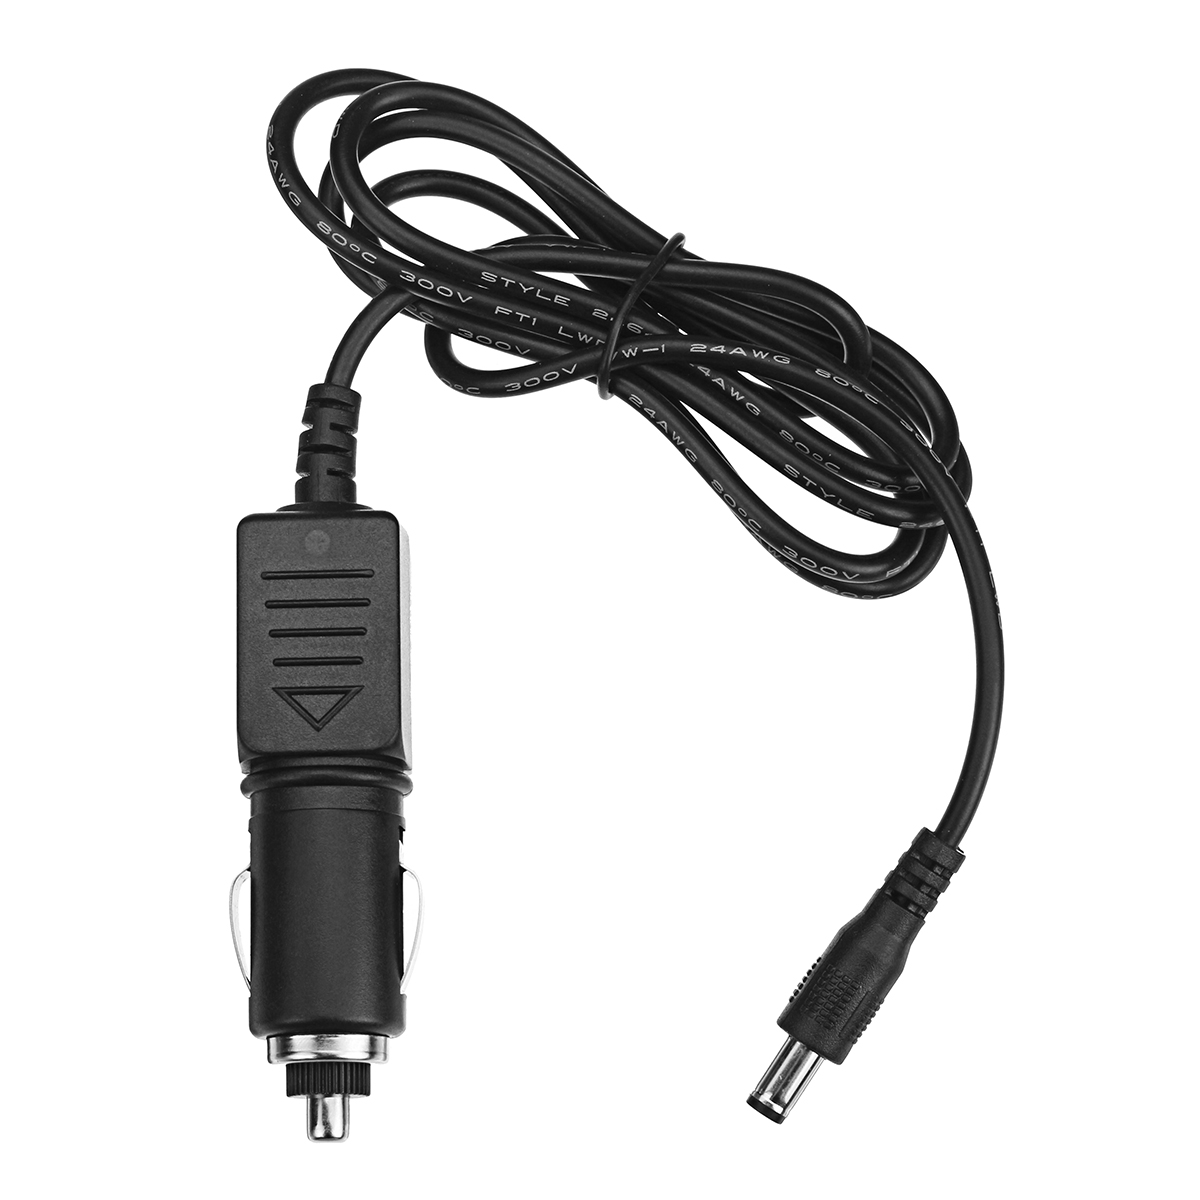 Individuals-are-not-sold-separately-Connector-with-rgb-lamp-JST-Plug-Dc12v-car-charger-EUUS-UK-Plug-1631414-5